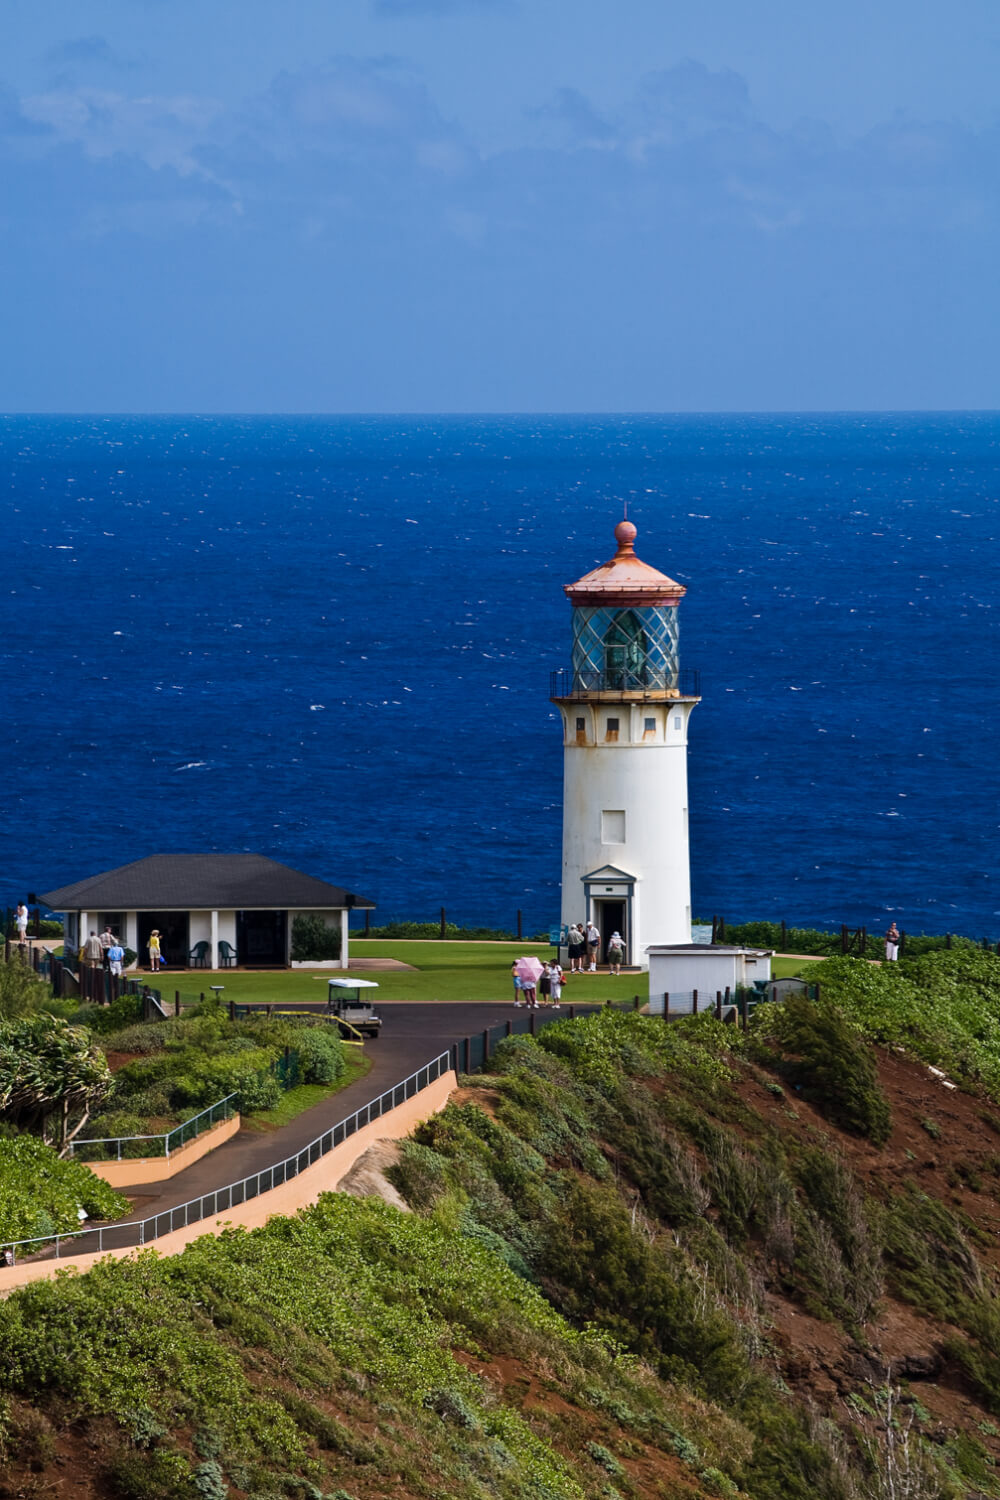 Tips for Hawaii on a Budget featured by top Hawaii blog, Hawaii Travel with Kids: Kids will love running around Kilauea Lighthouse and looking for birds, one of the free things to do on Kauai for families